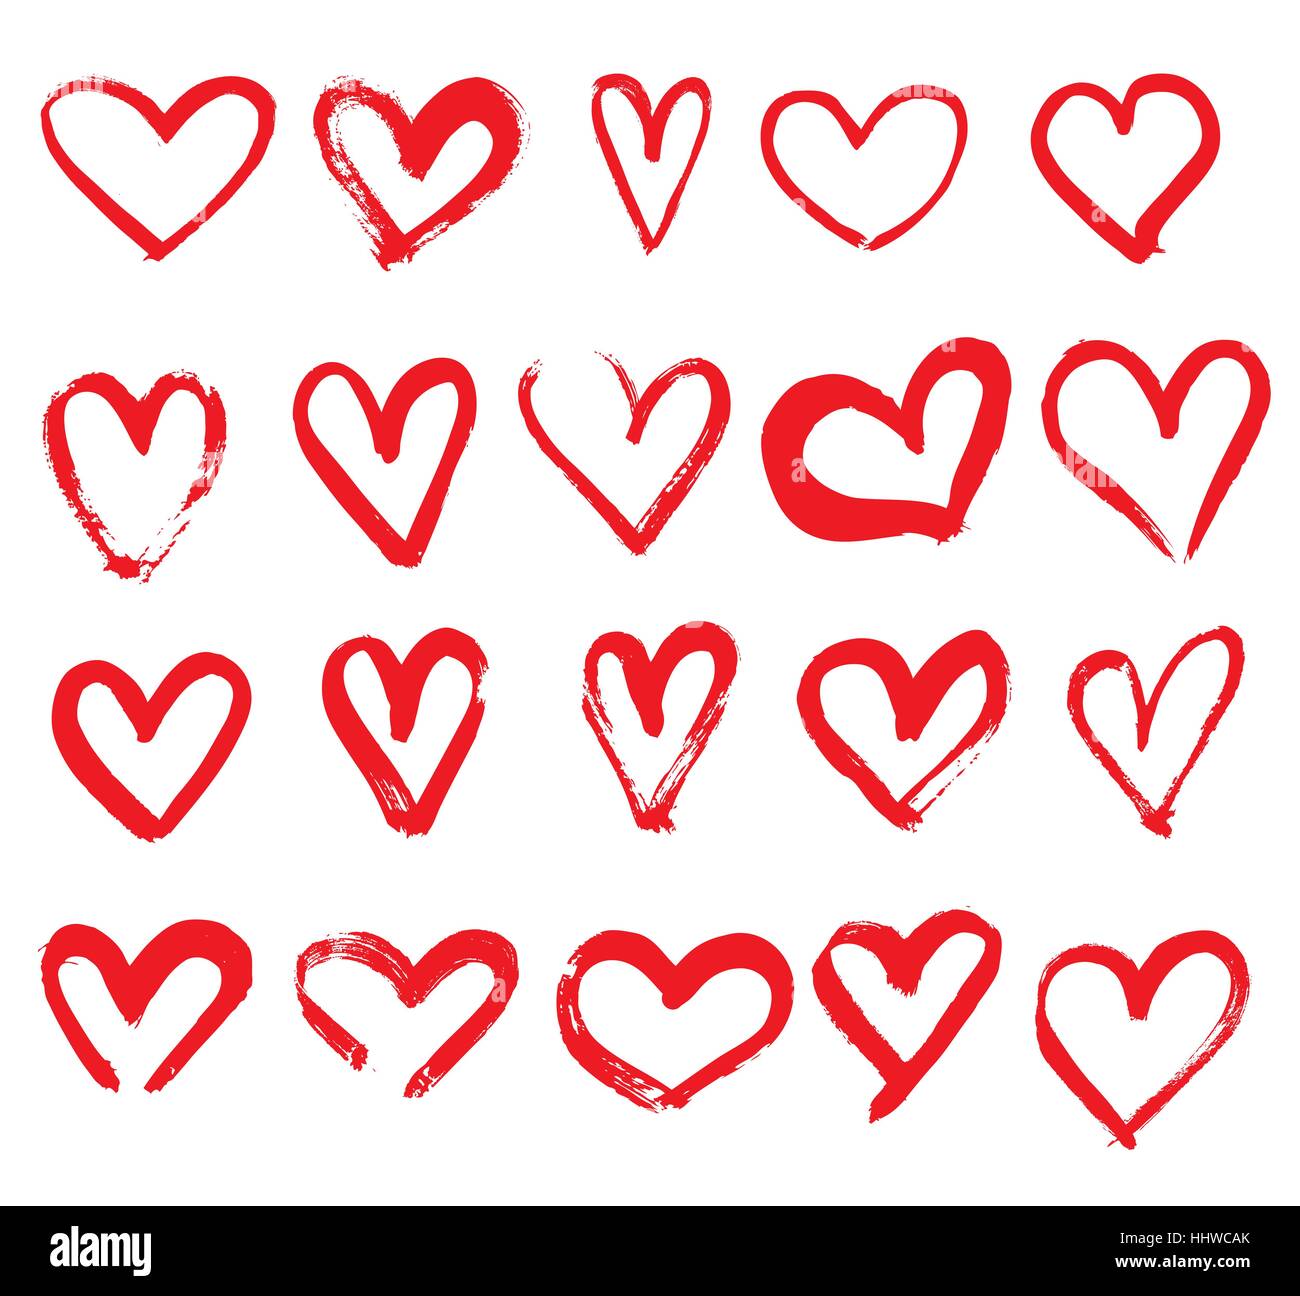 Set of Hand Drawn Hearts. Red Color. Vector Illustration. Stock Vector